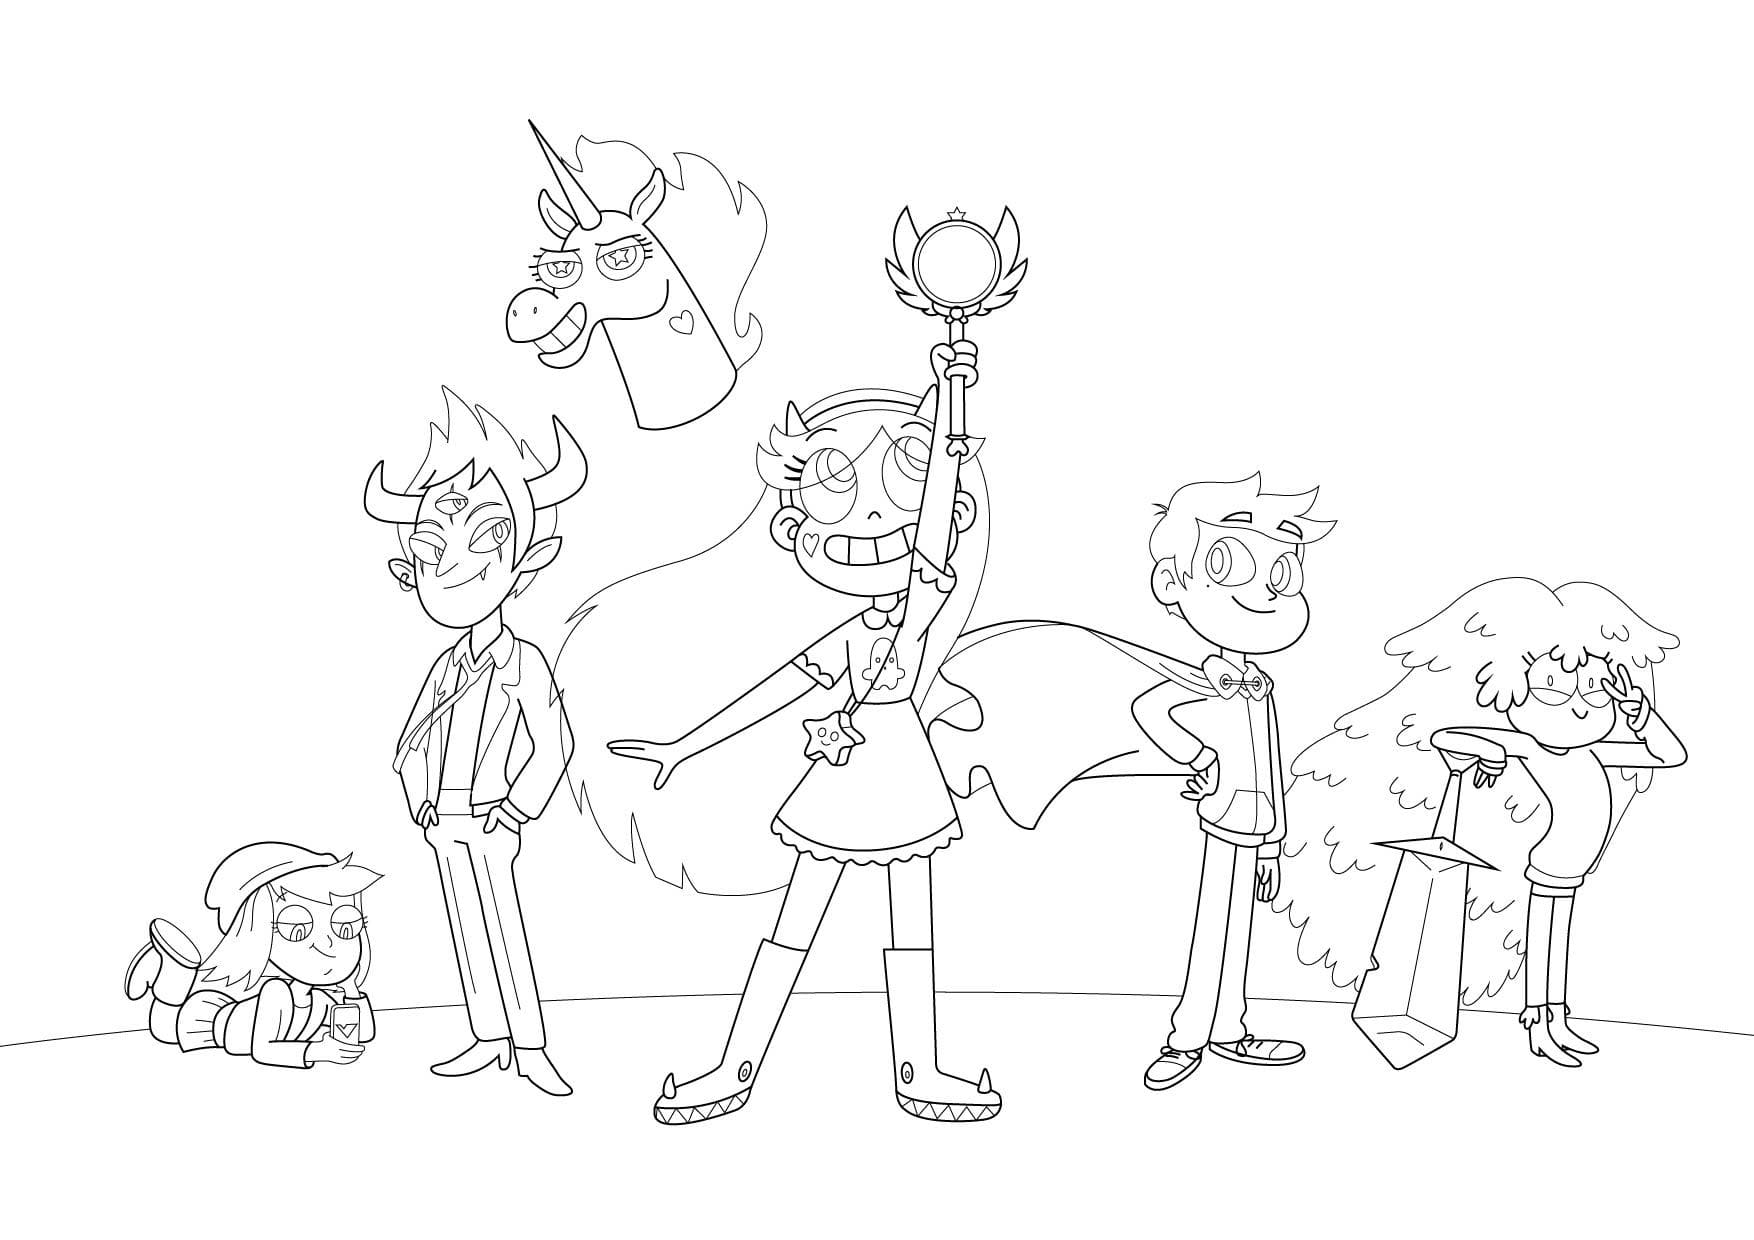 Star vs the Forces of Evil coloring pages. Print the princess